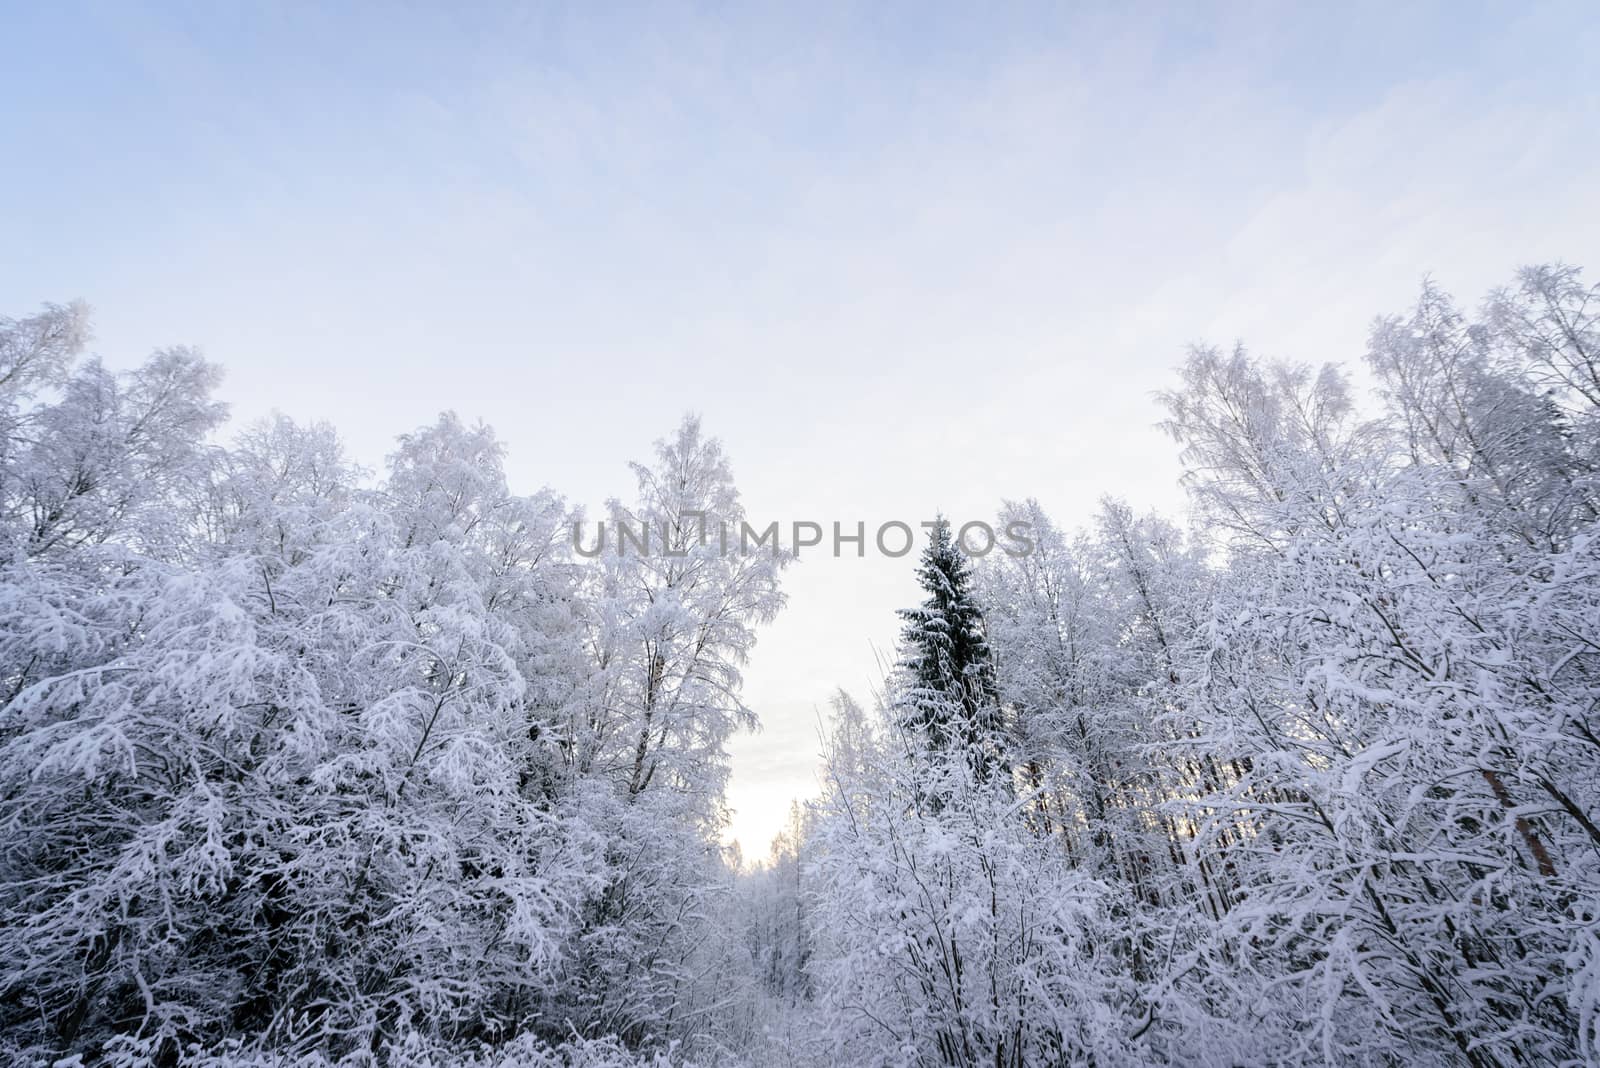 The forest has covered with heavy snow in winter season at Lapla by animagesdesign